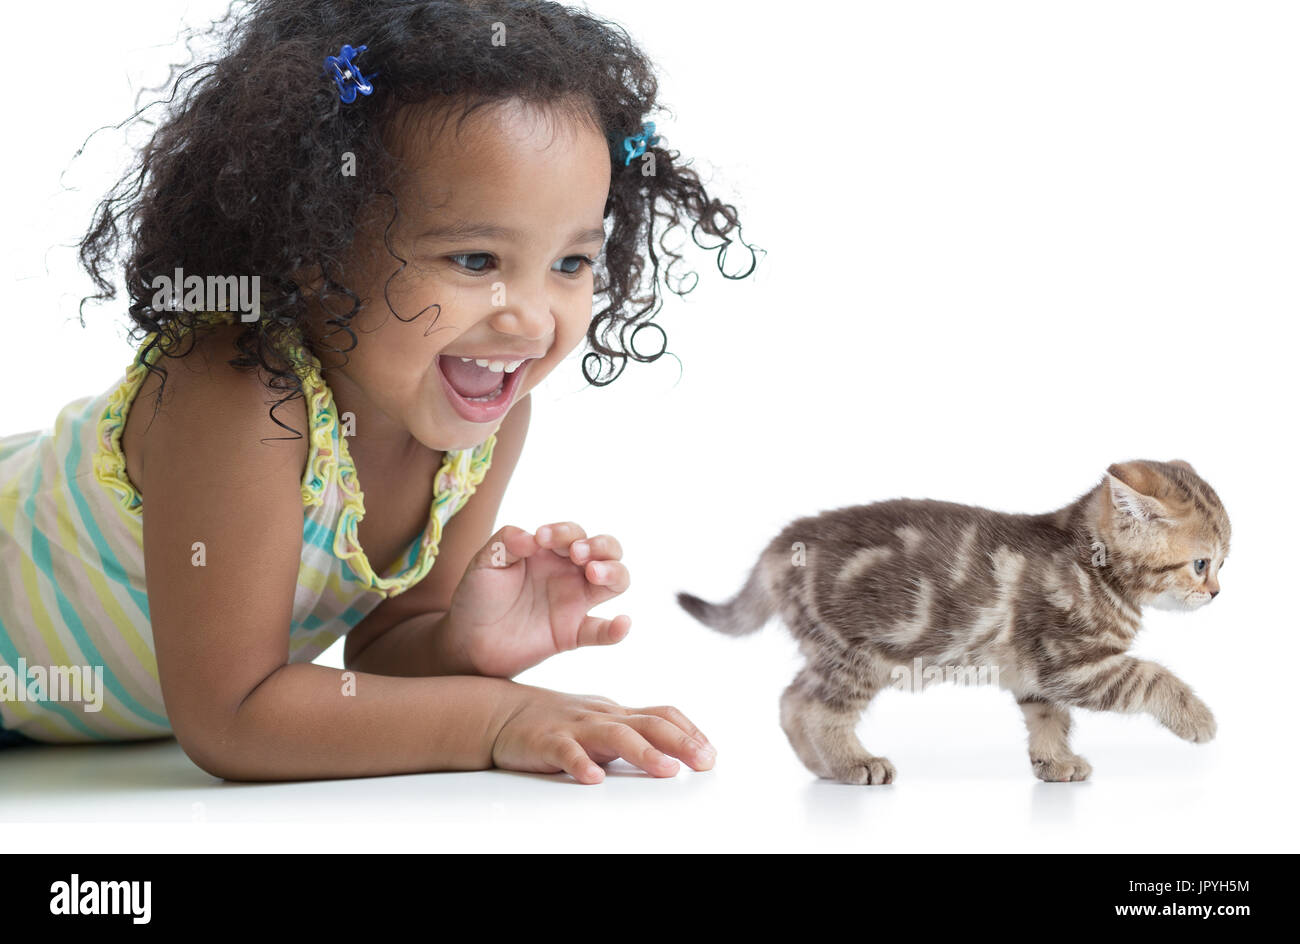 Happy kid girl playing with kitten Stock Photo